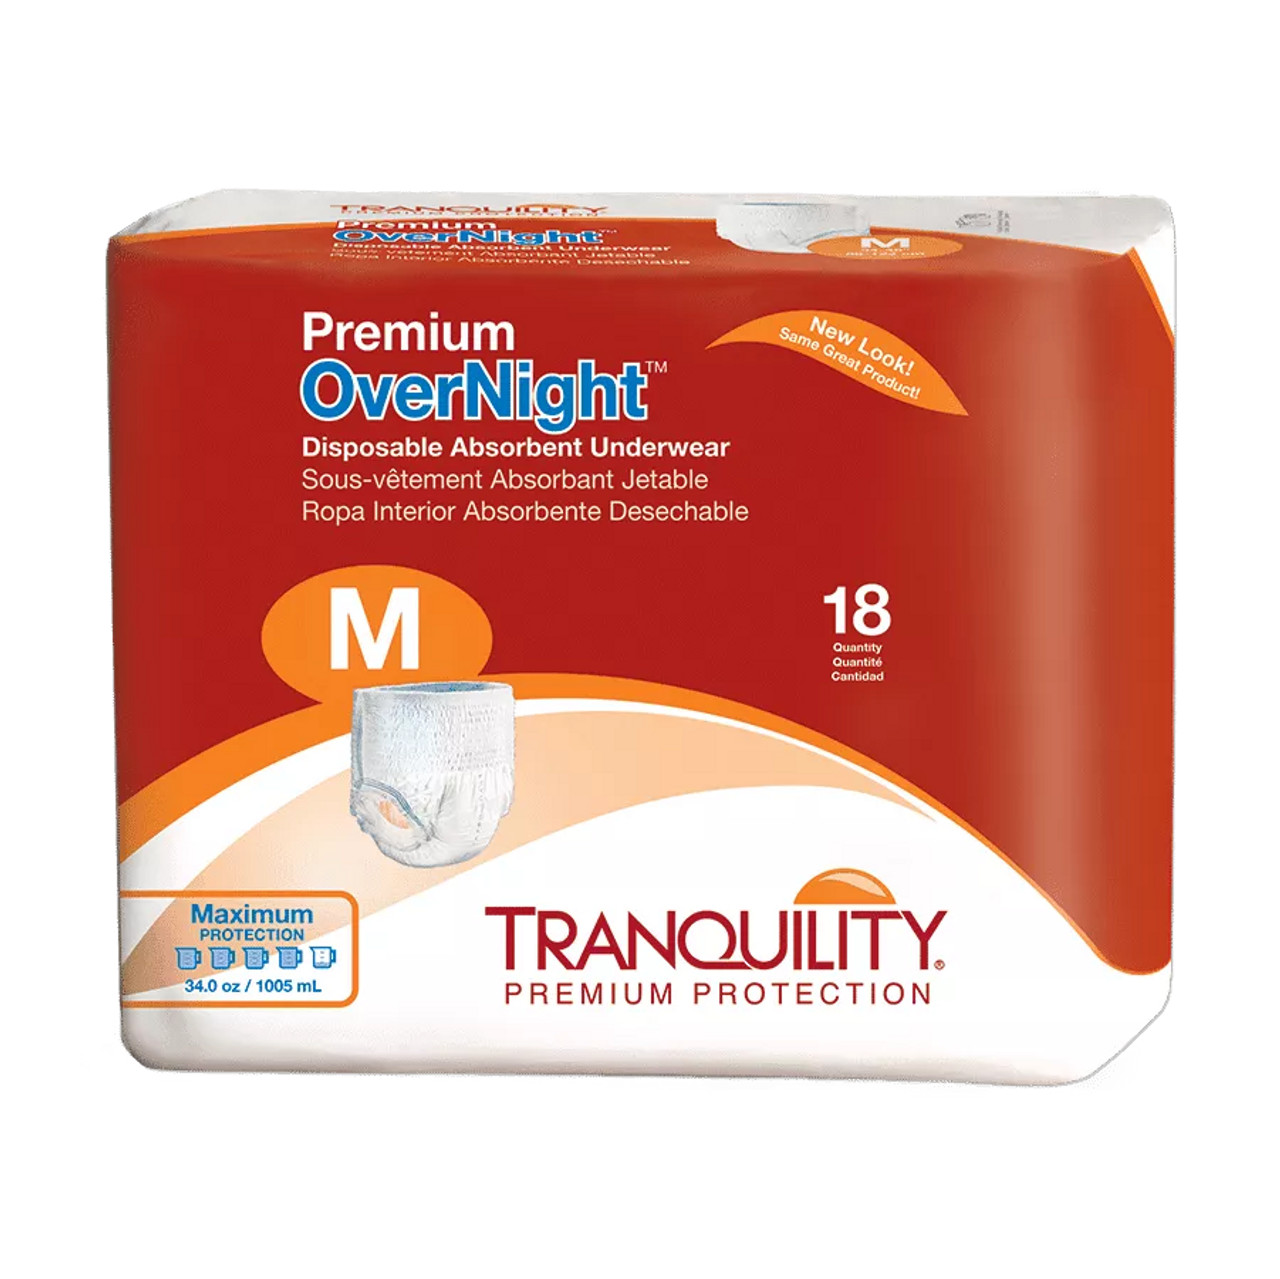 Tranquility 2116 Premium OverNight Disposable Absorbent Underwear